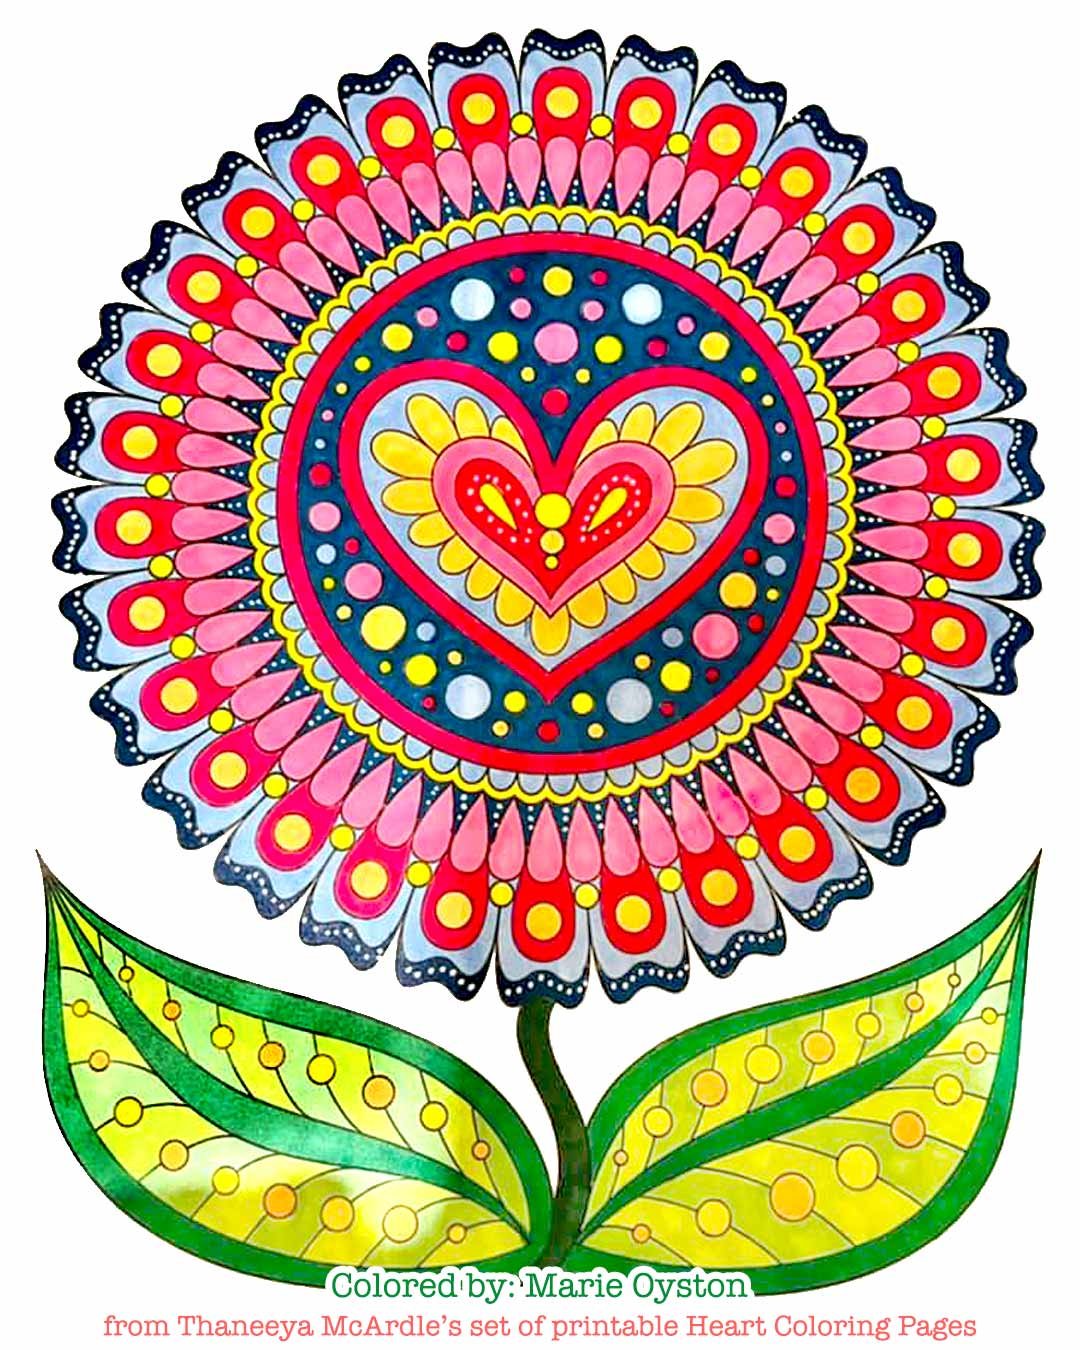 Heart Coloring Pages   Set of 20 Printable Coloring Pages by ...